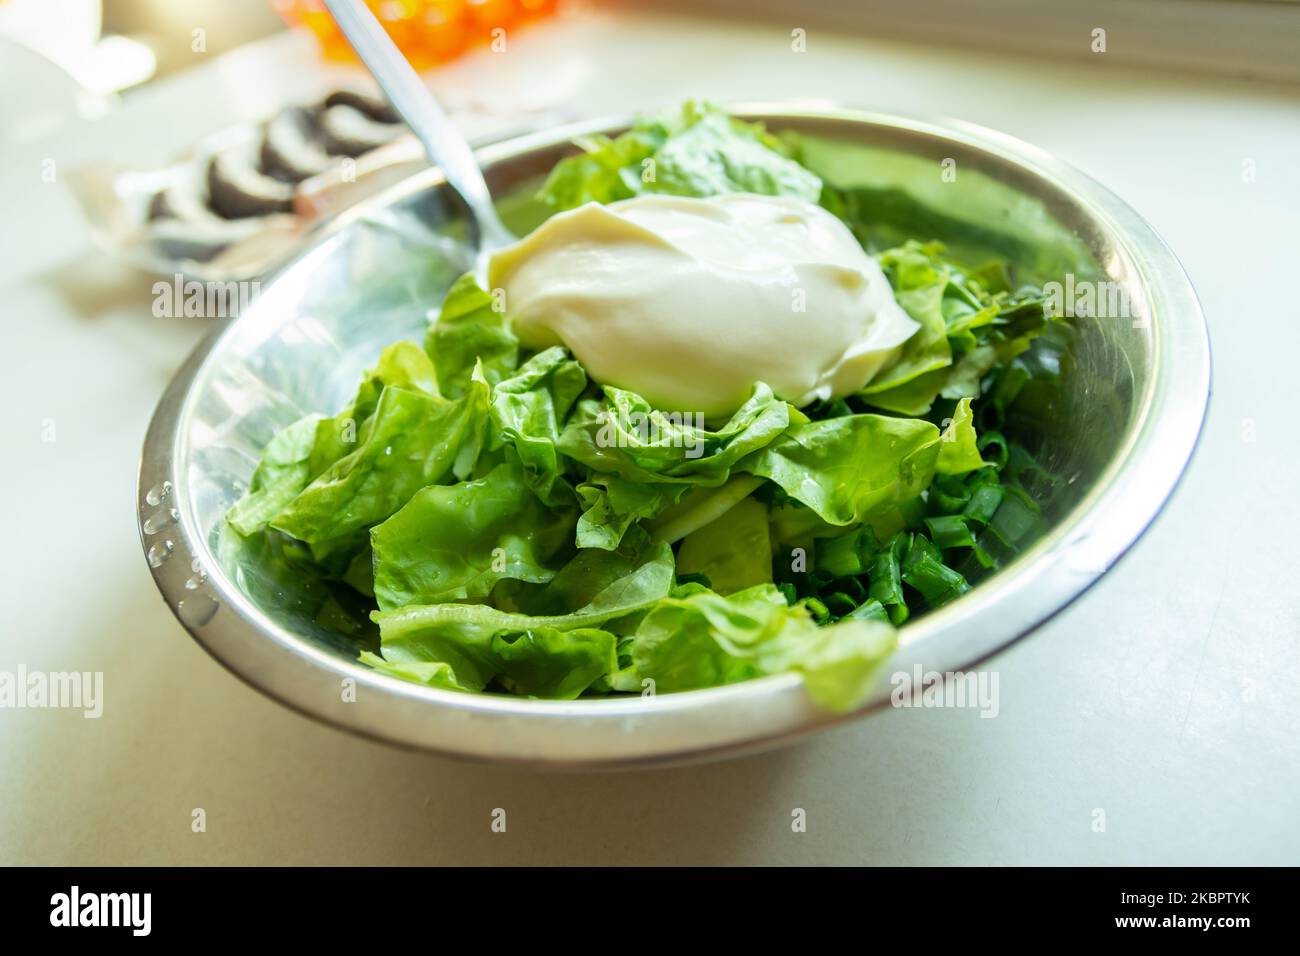 Sour cream on green lettuce in a silver bowl Stock Photo